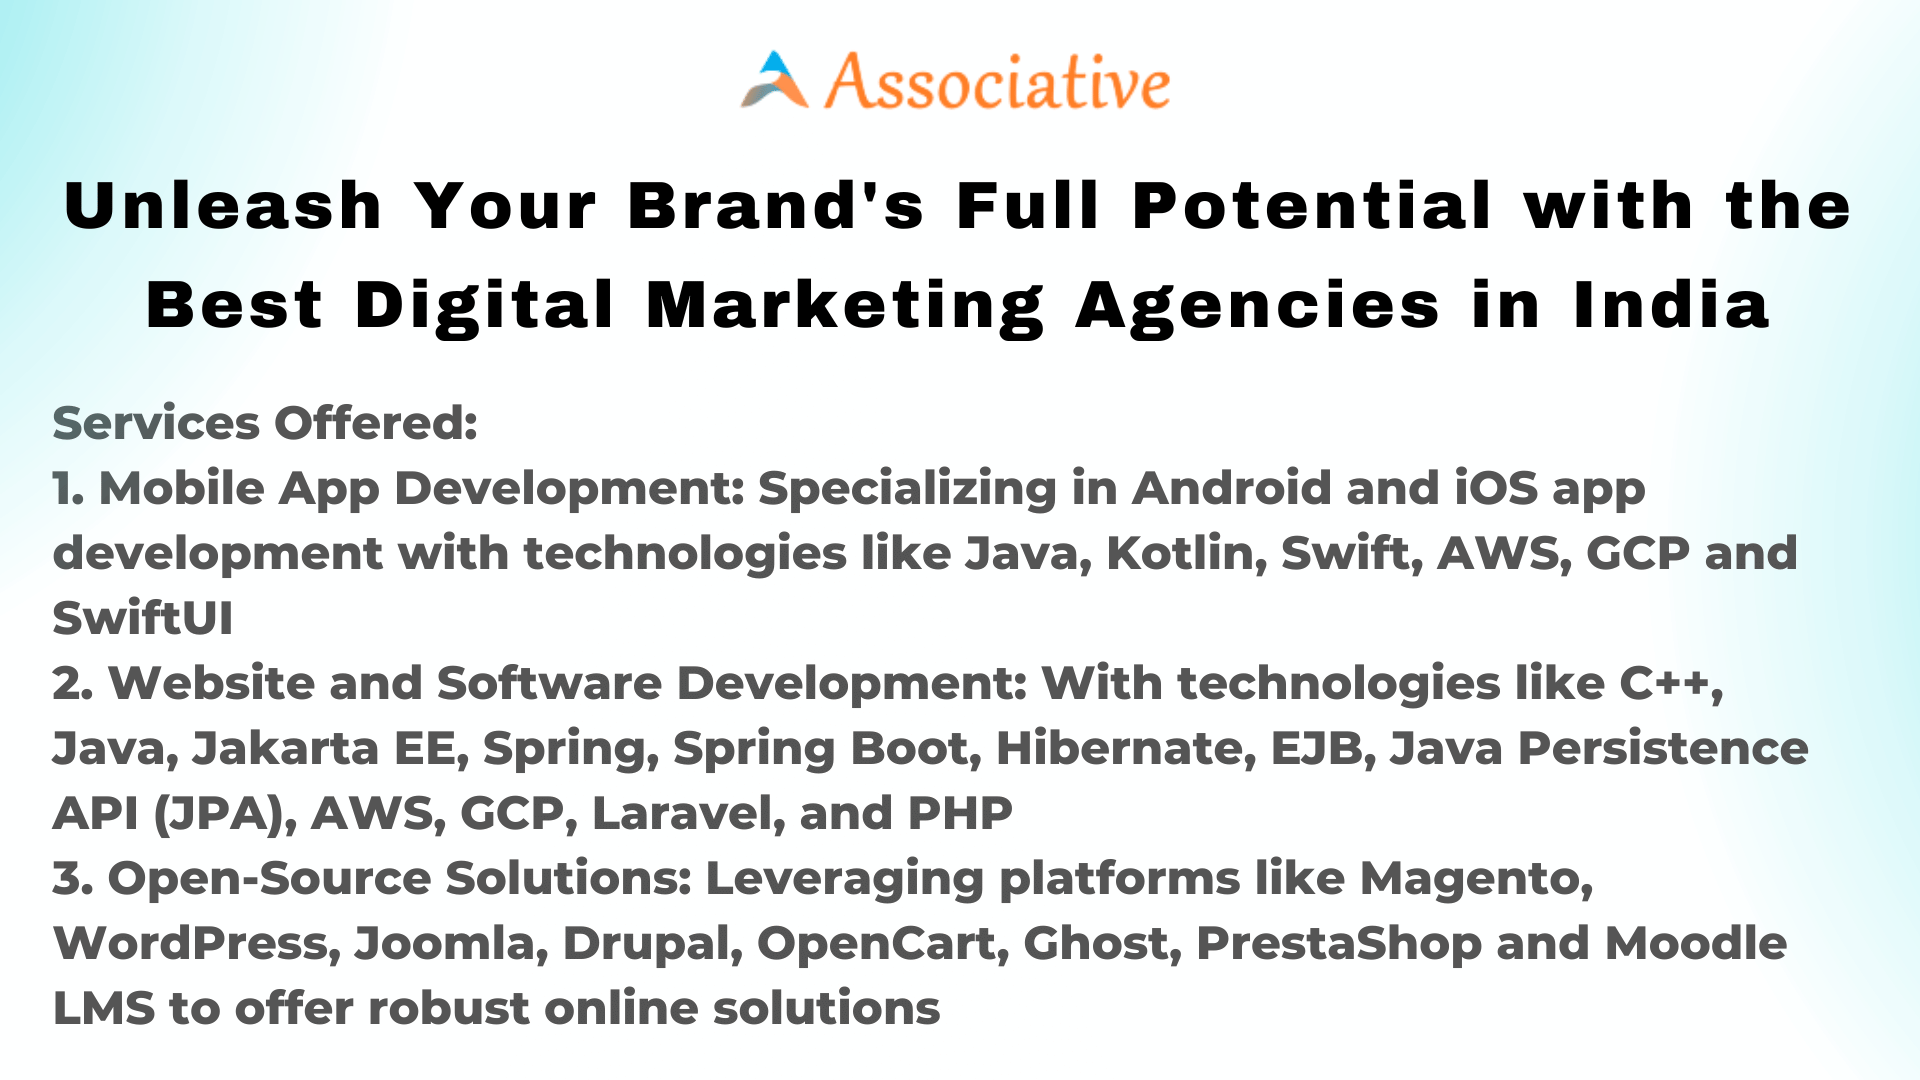 Unleash Your Brand's Full Potential with the Best Digital Marketing Agencies in India